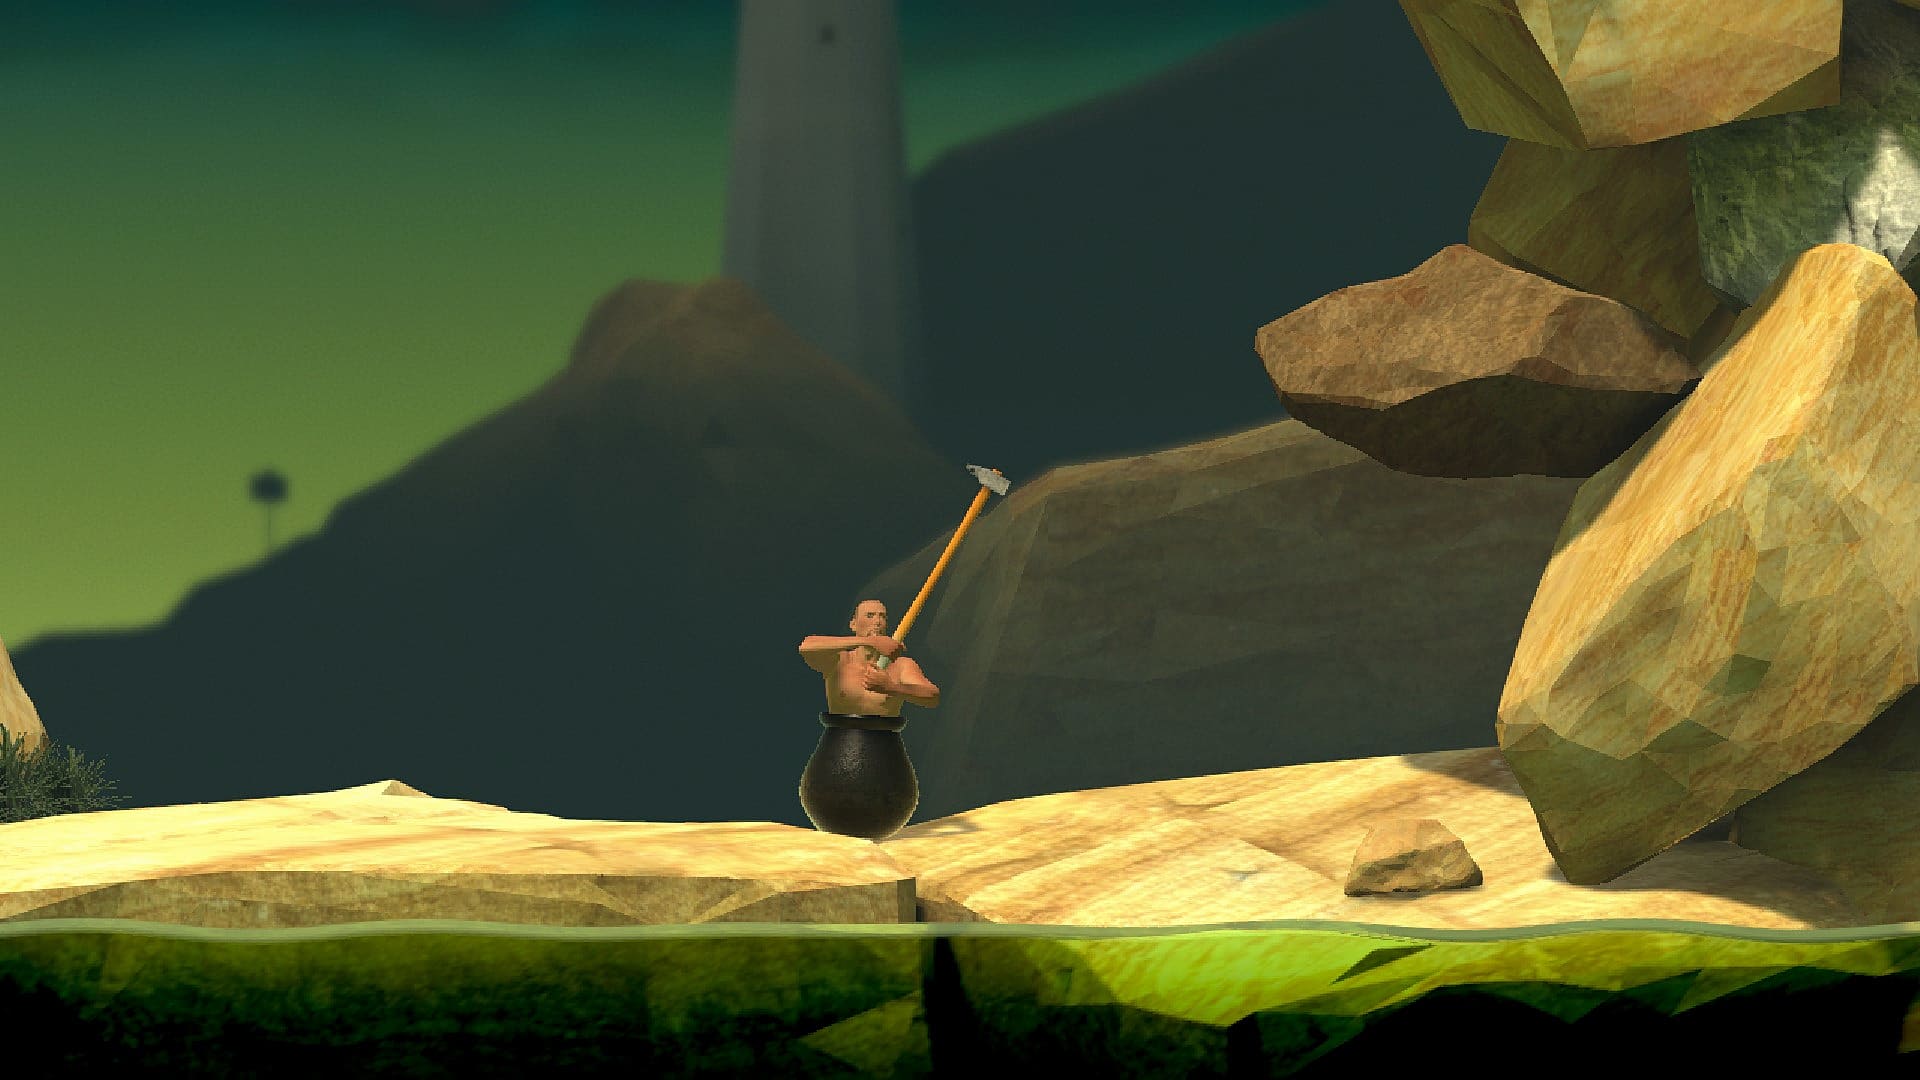 buy getting over it with bennett foddy ending